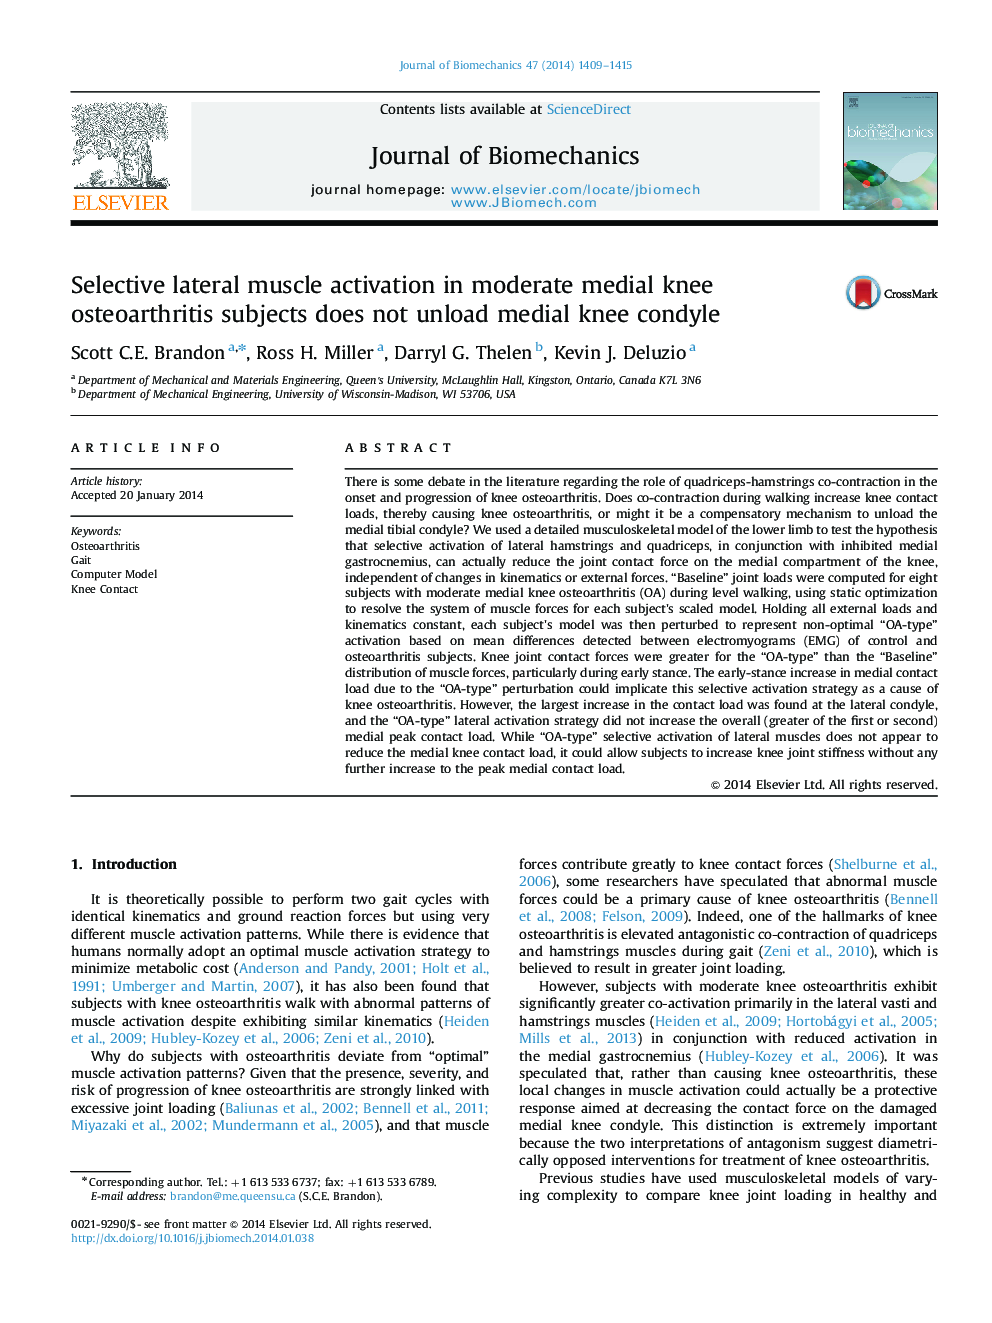 Selective lateral muscle activation in moderate medial knee osteoarthritis subjects does not unload medial knee condyle